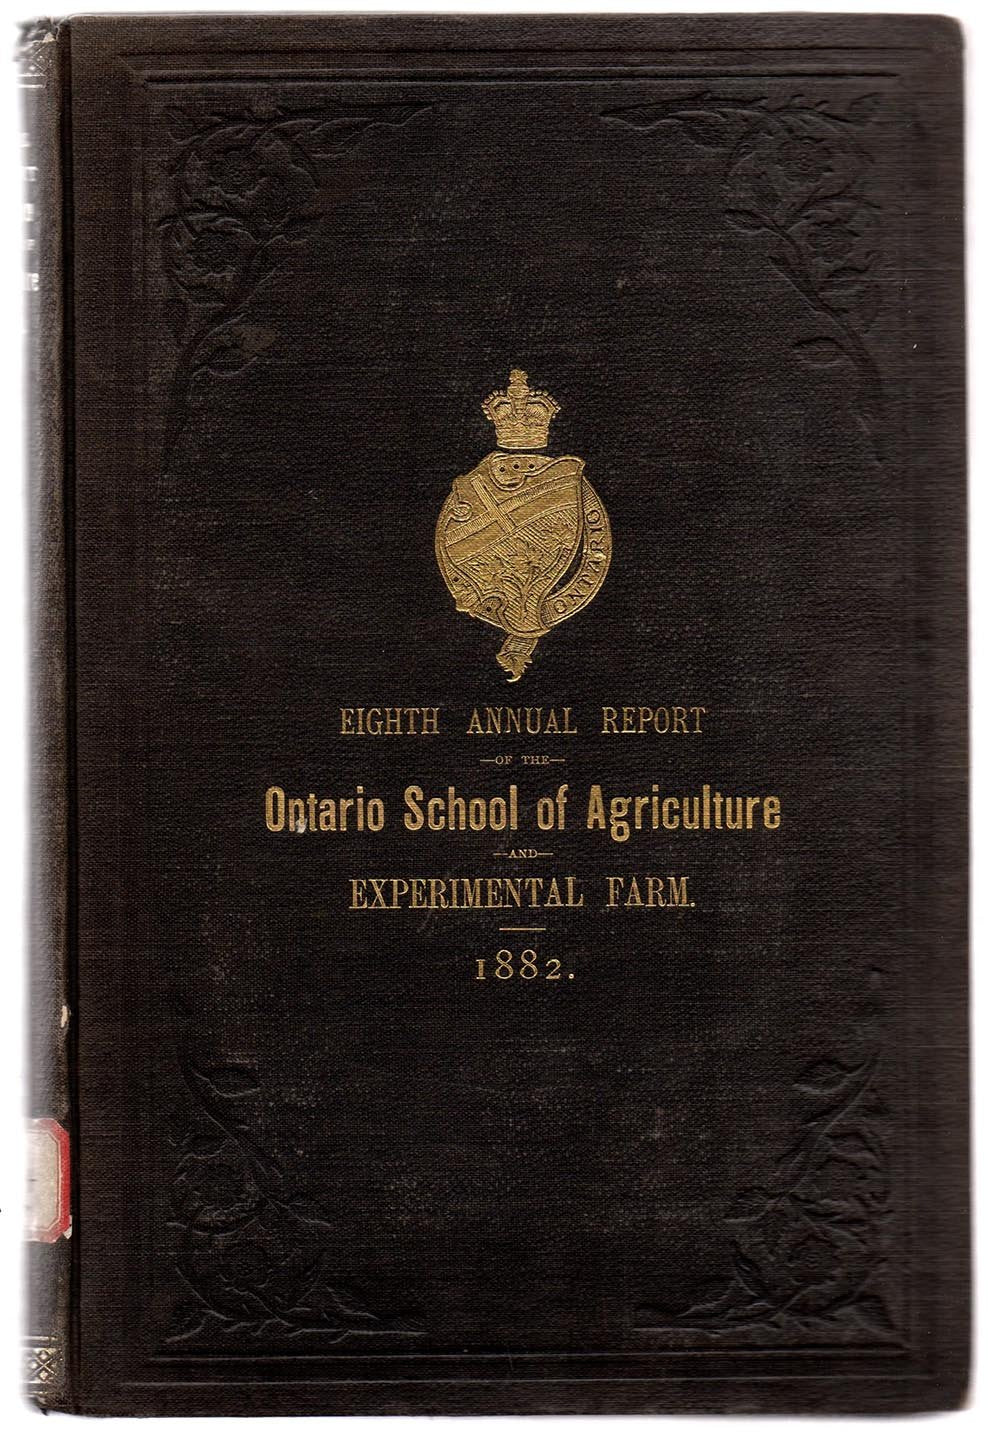 Eighth Annual Report of the Ontario School of Agriculture and Experimental Farm, For the year Ending 31st December, 1882